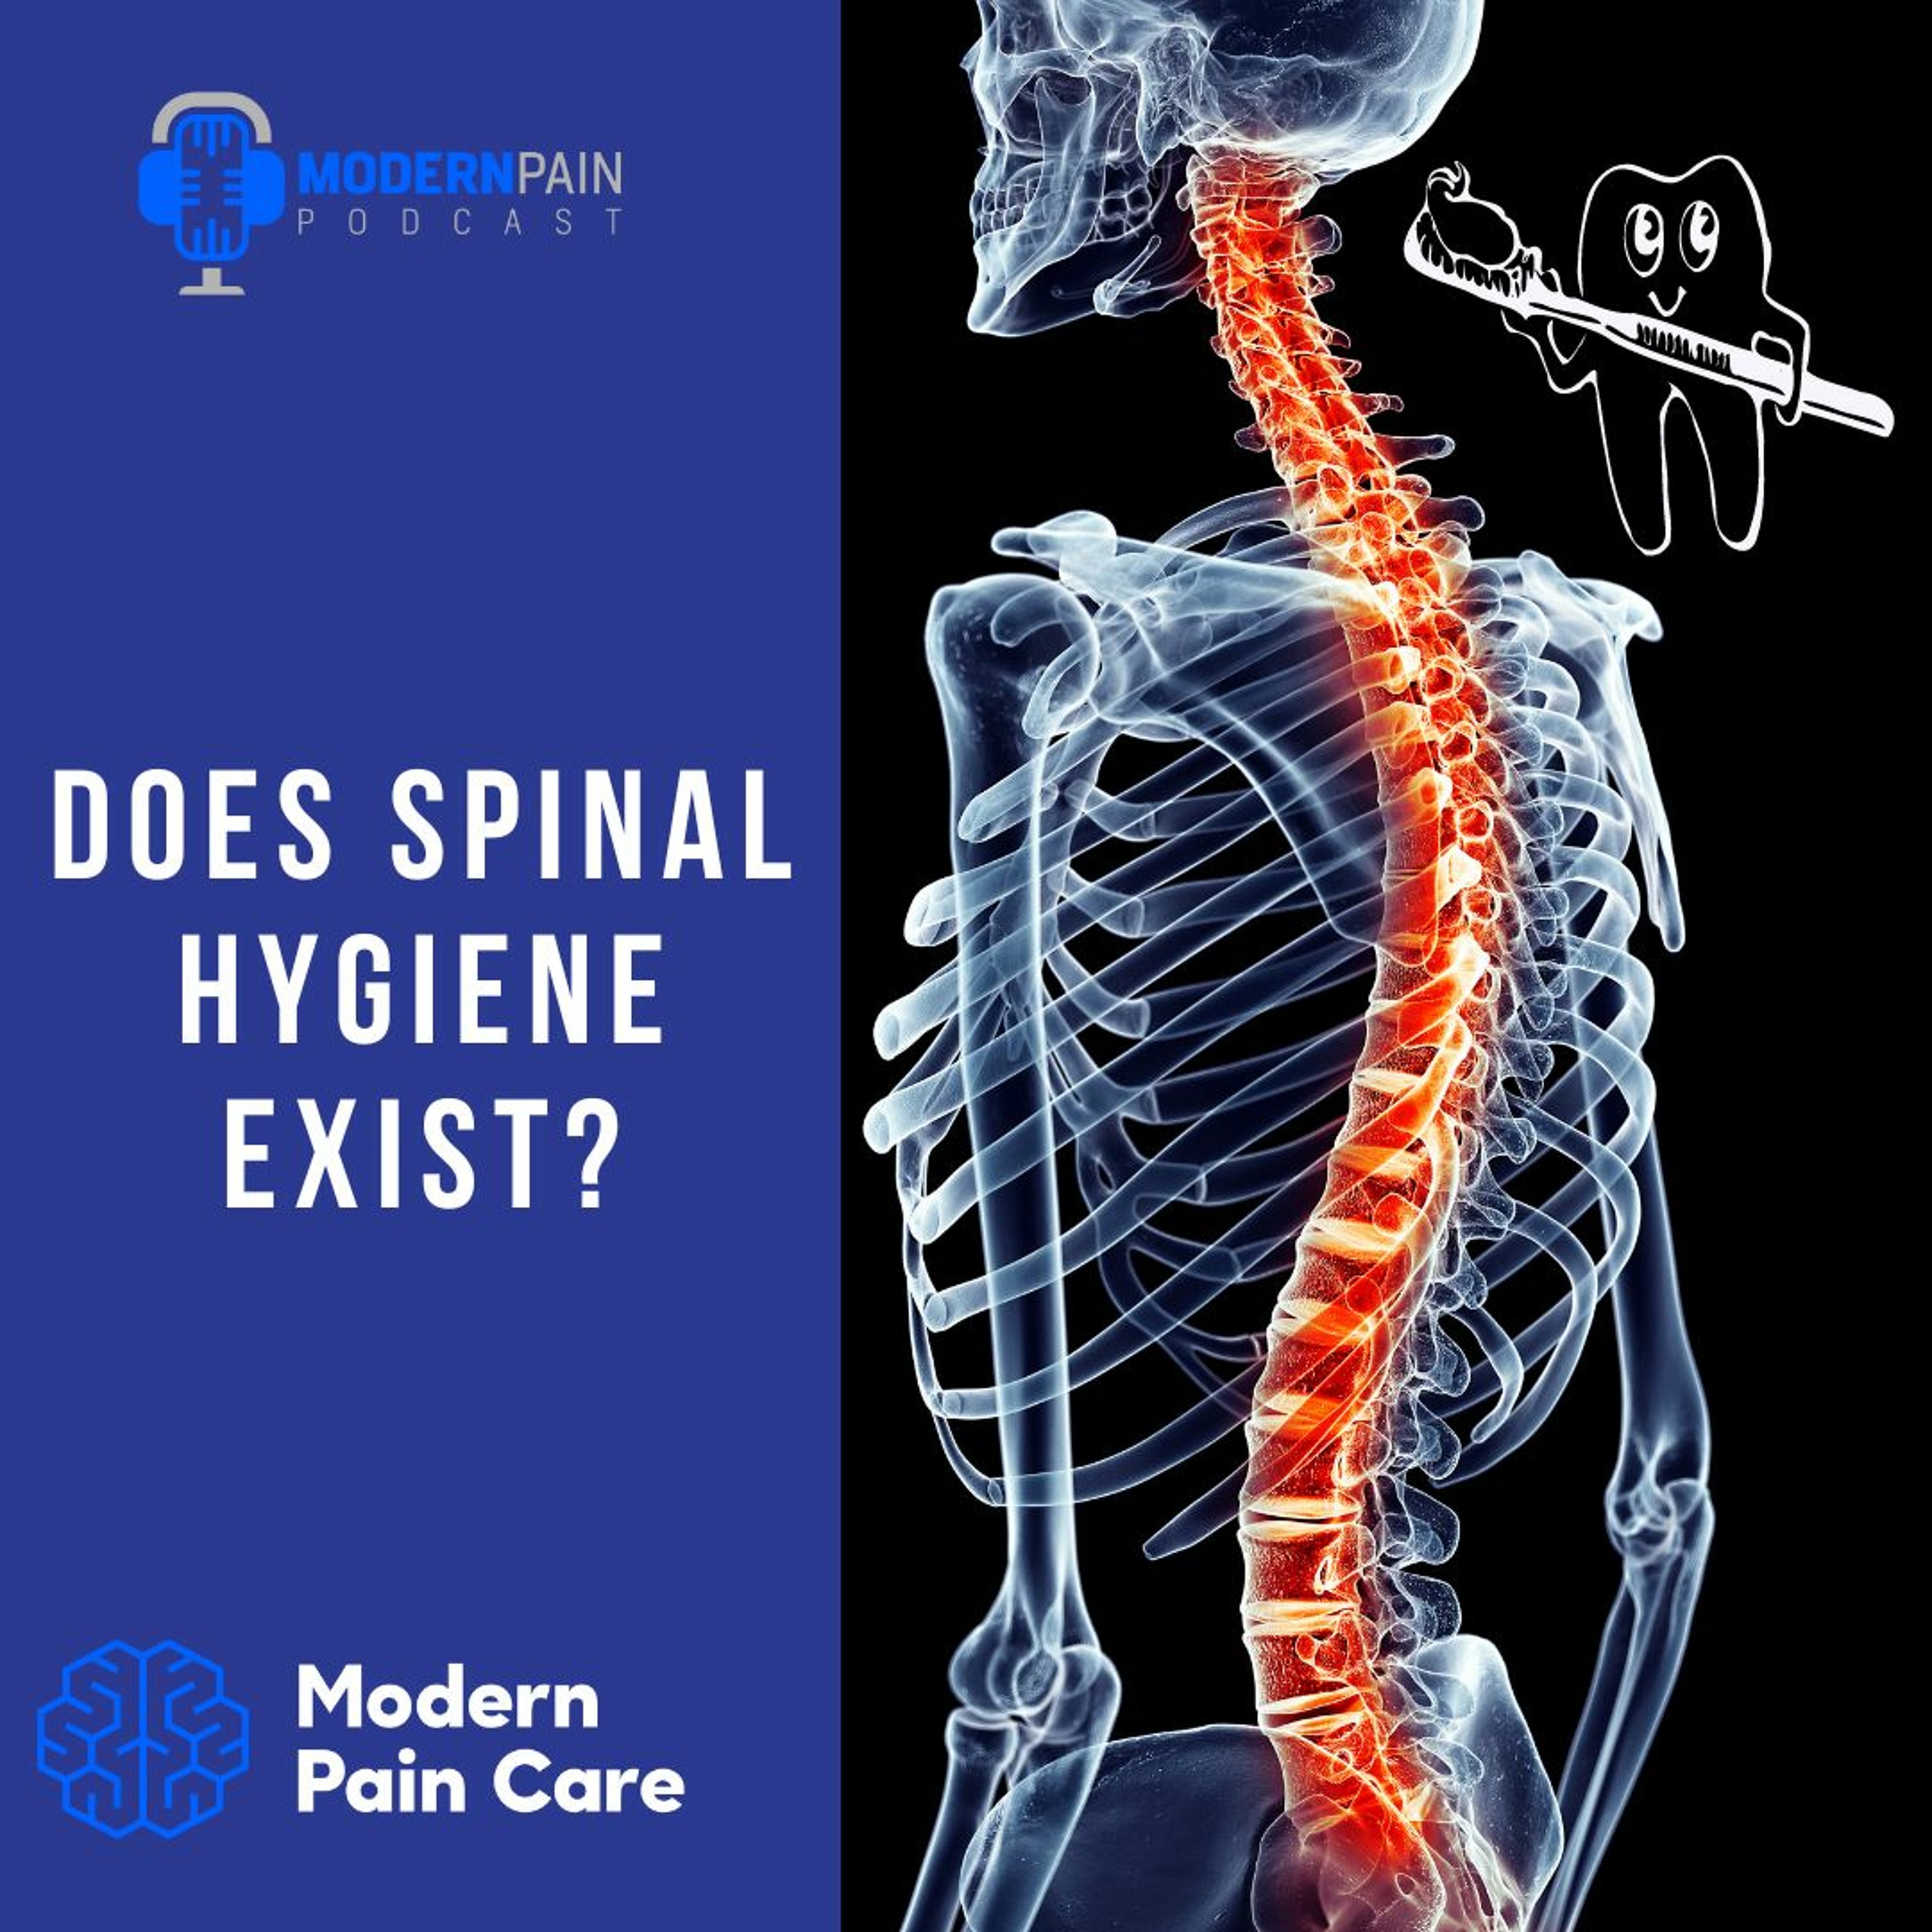 Does Spinal Hygiene Exist? Image